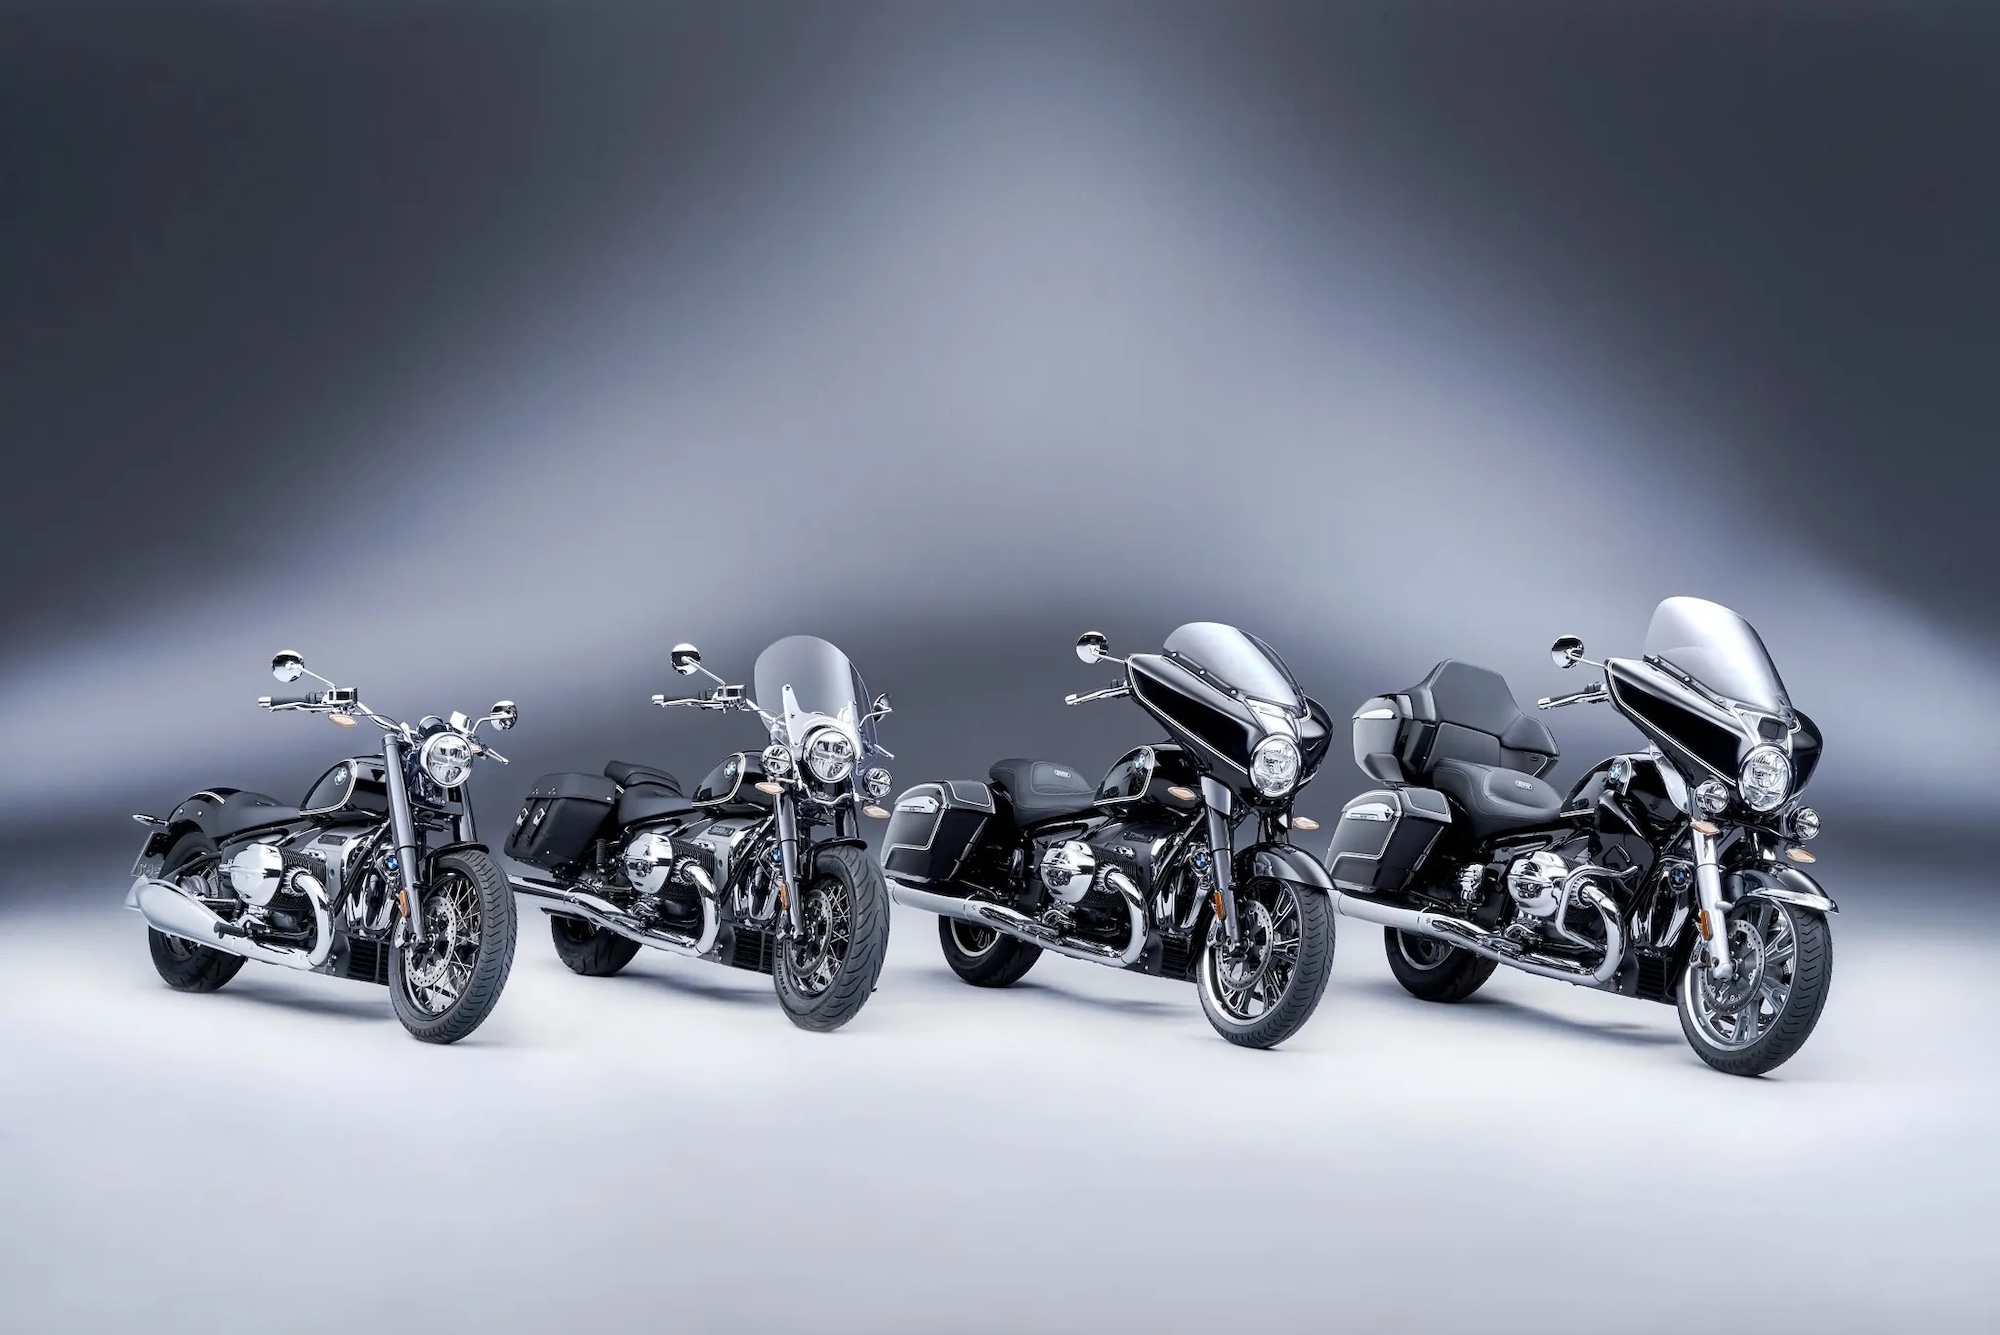 Four BMW motorcycles.